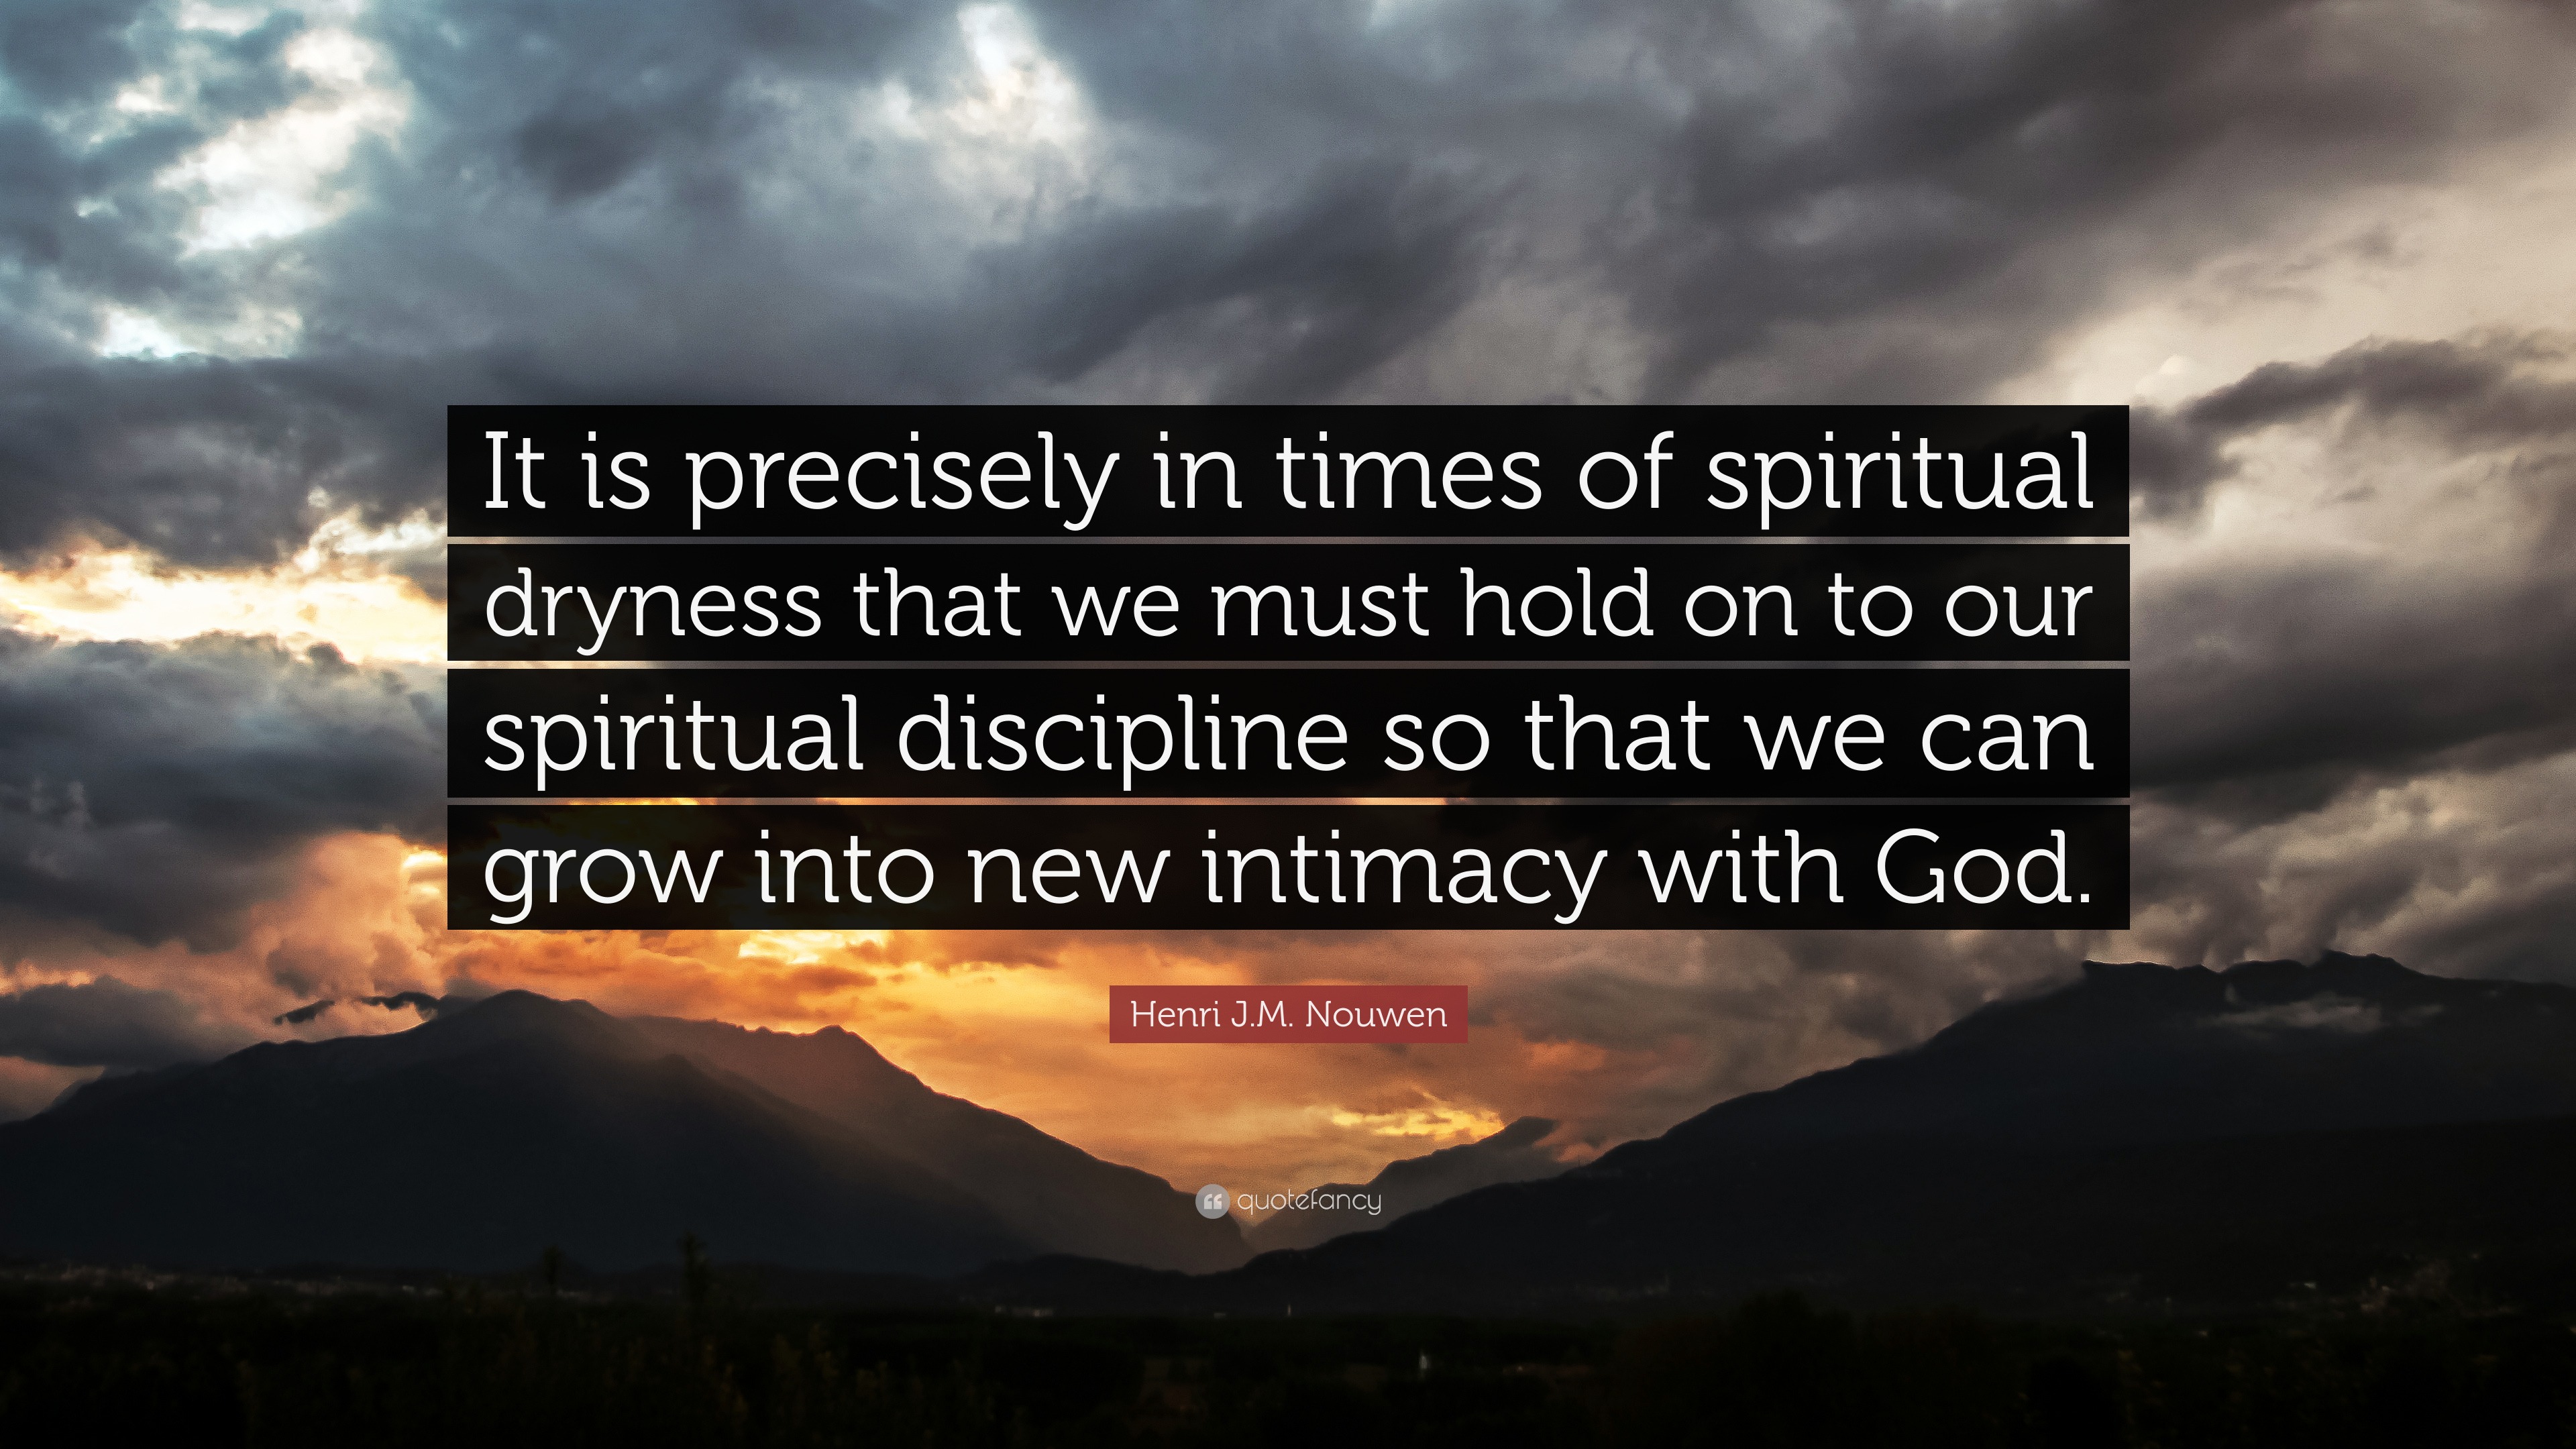 Henri J.M. Nouwen Quote: “It is precisely in times of spiritual dryness ...